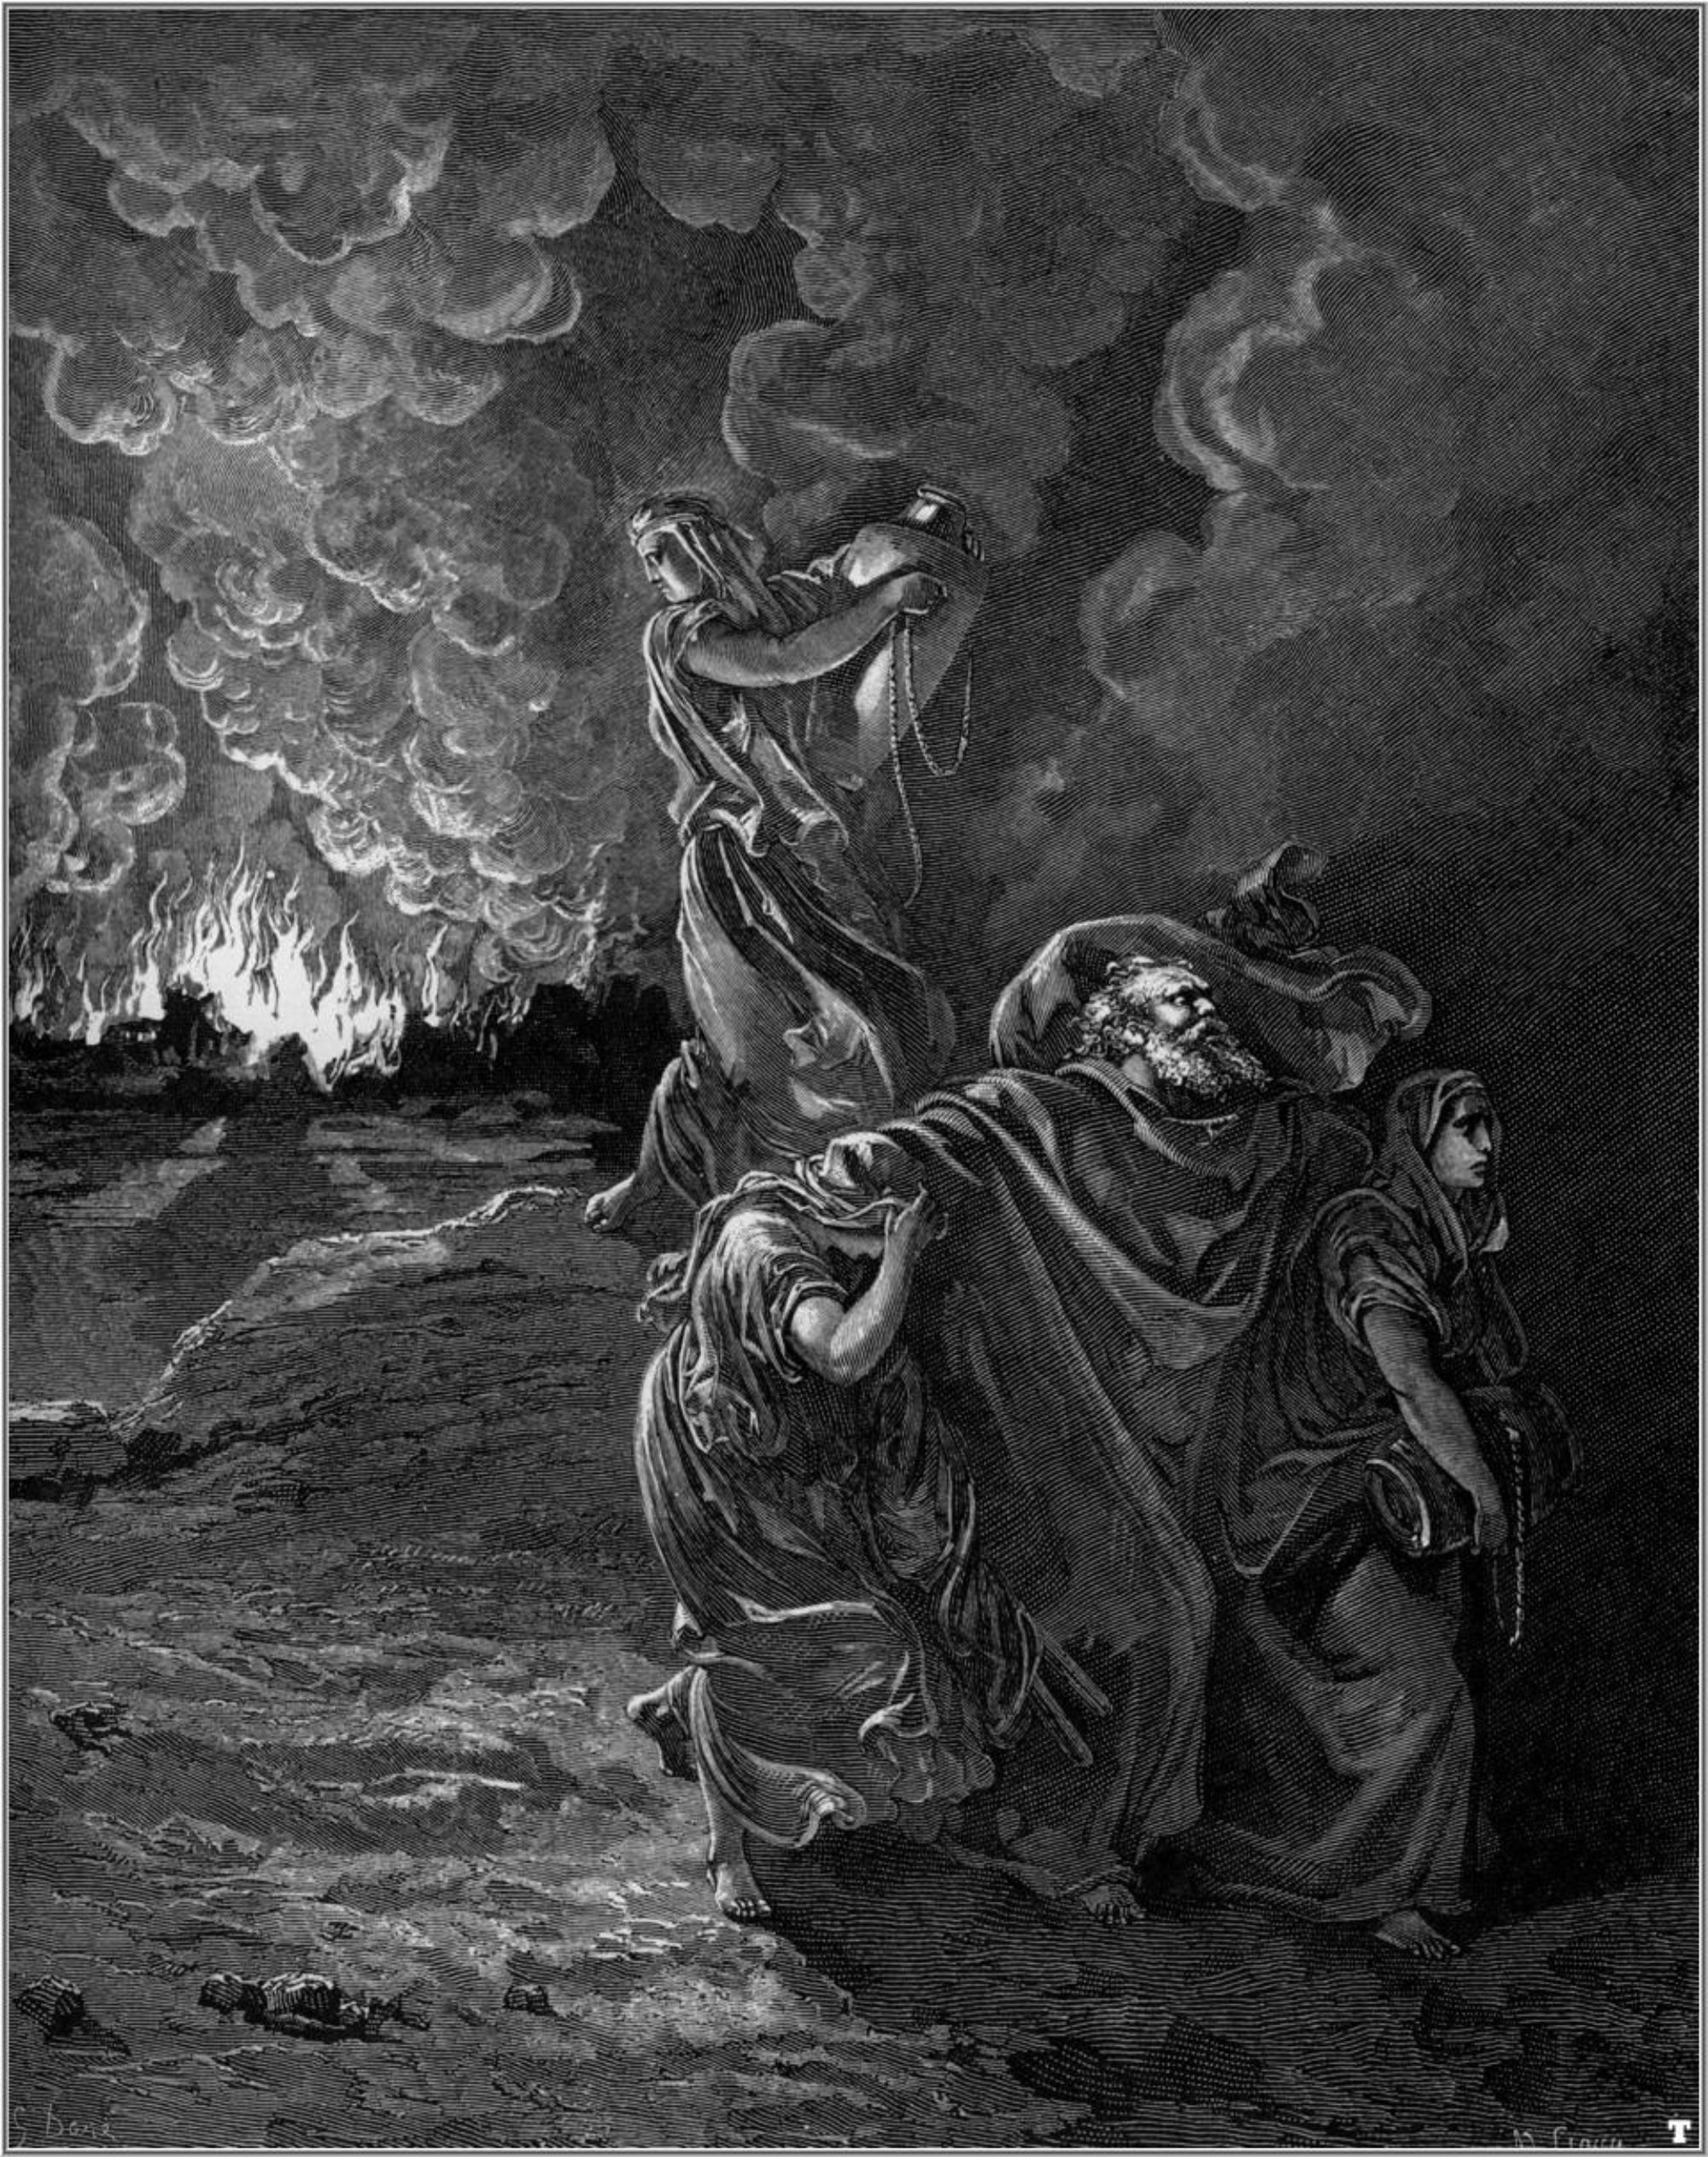 Old painting or drawing showing a group of people fleeing from a fire